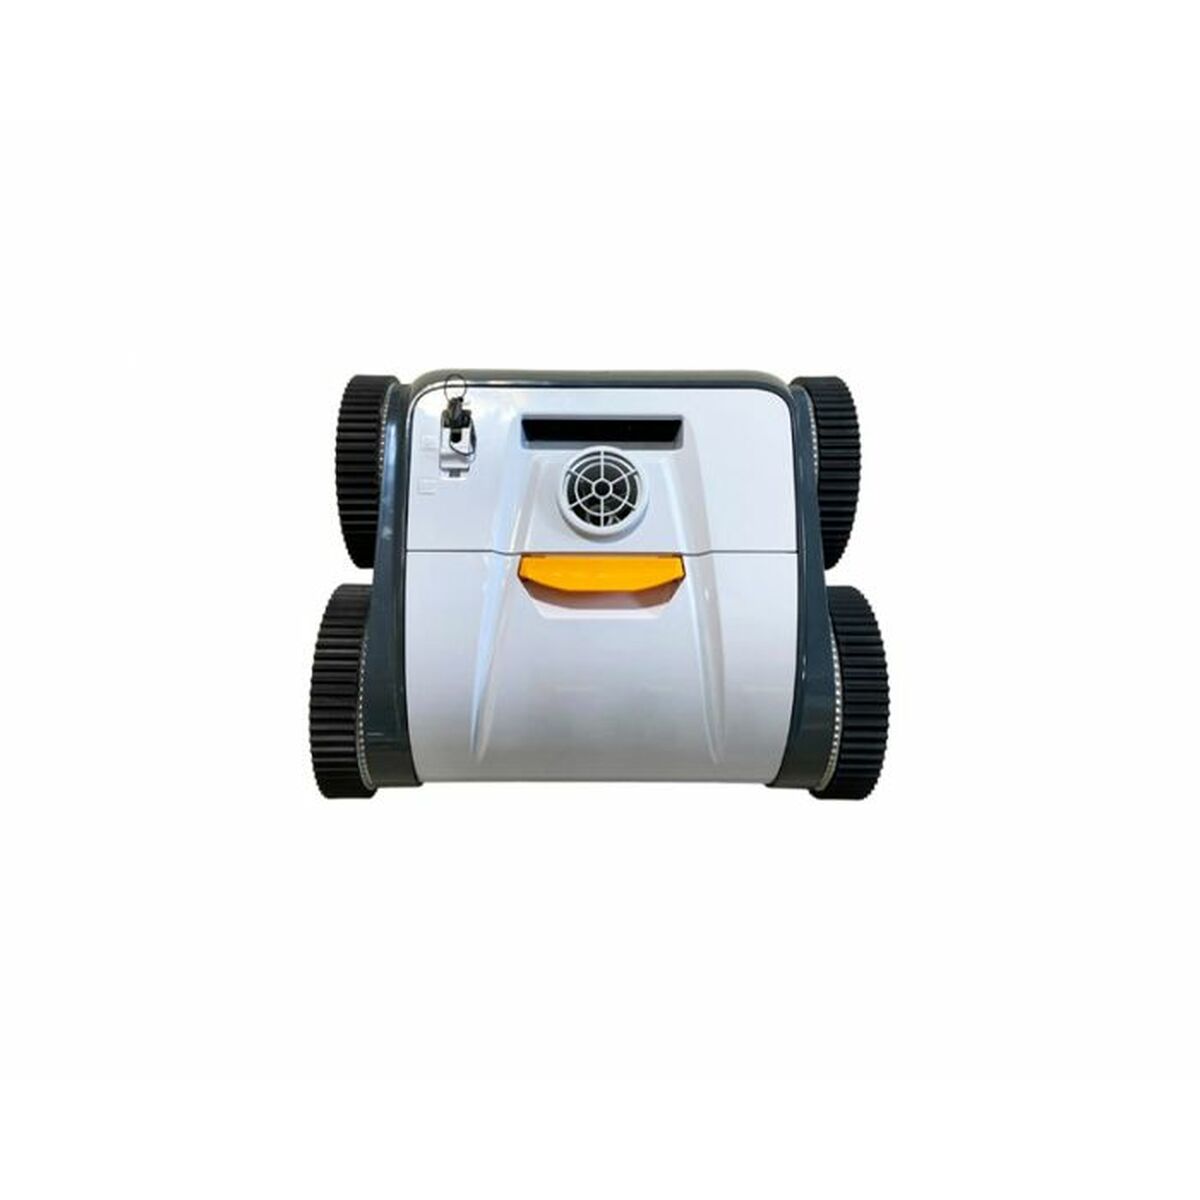 Automatic Pool Cleaners Bestway 16908